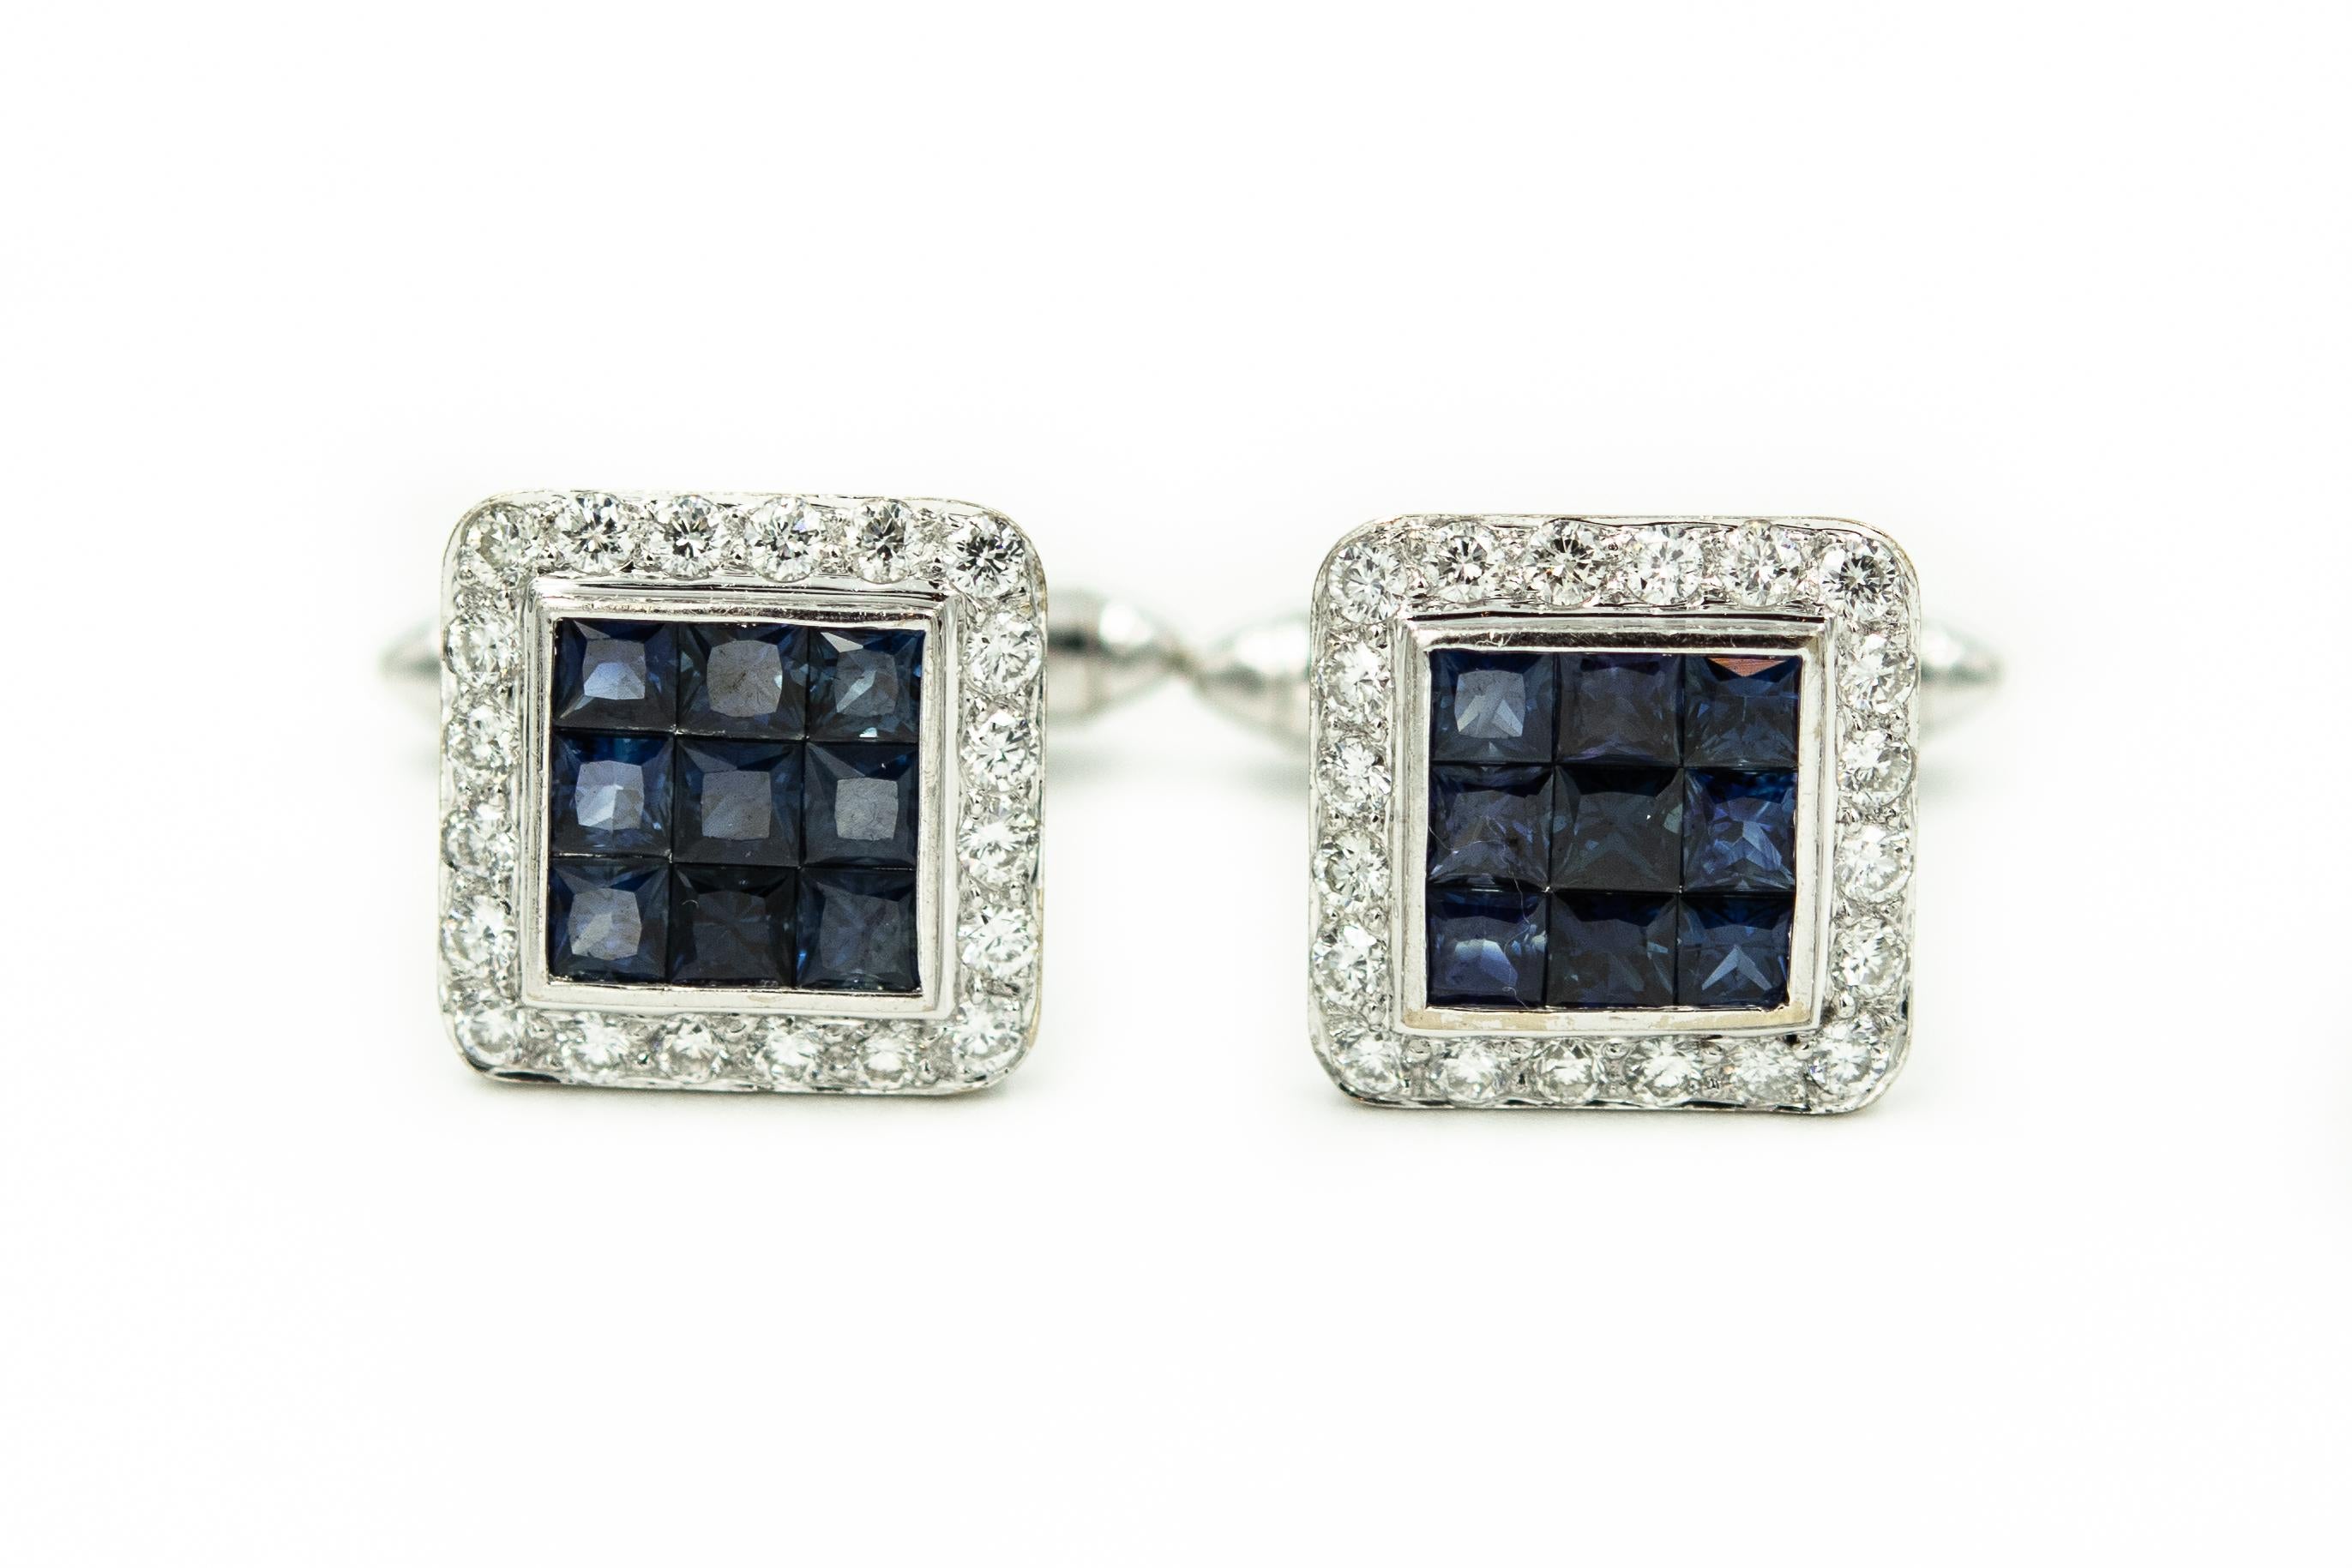 These 18k white gold square cufflinks and tie-tac feature a center section of 9 invisible set princess cut blue sapphires with an outer border of 20 round diamonds in each piece of the set.  The approximate total diamond weight for the set is 2.8